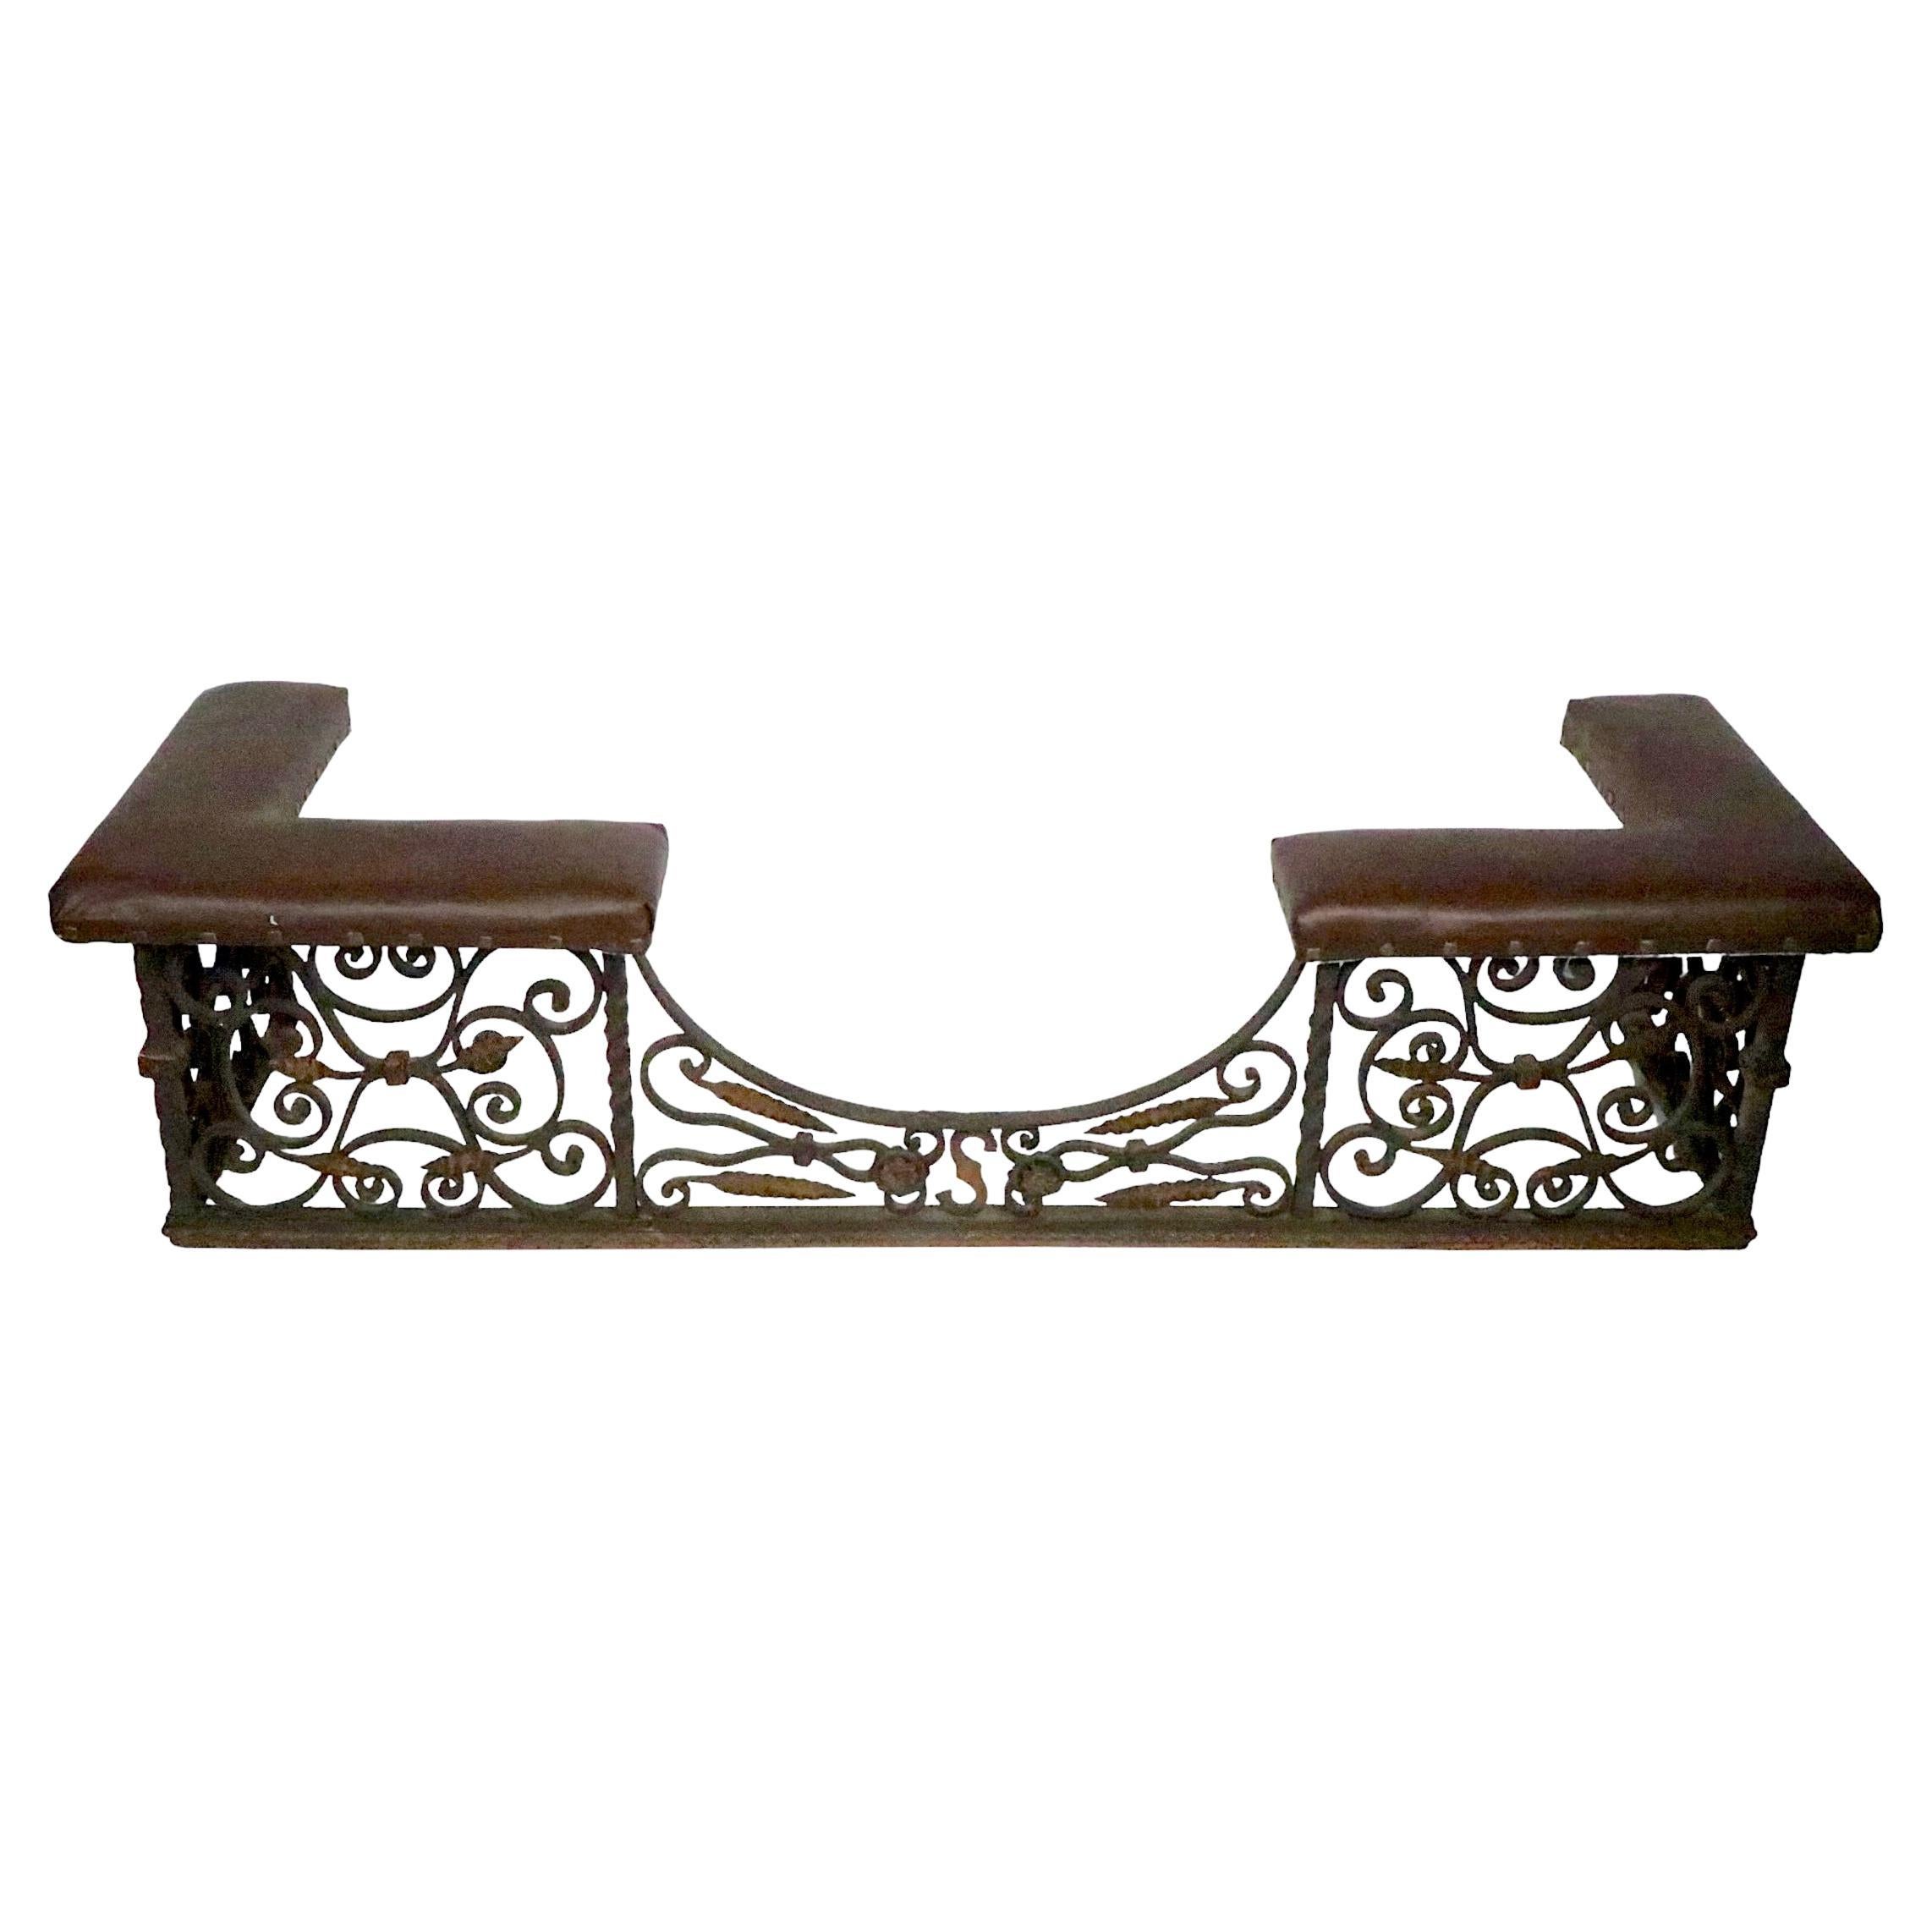 Antique Arts and Crafts Gothic Spanish Style Wrought Iron Bench Club Fender For Sale